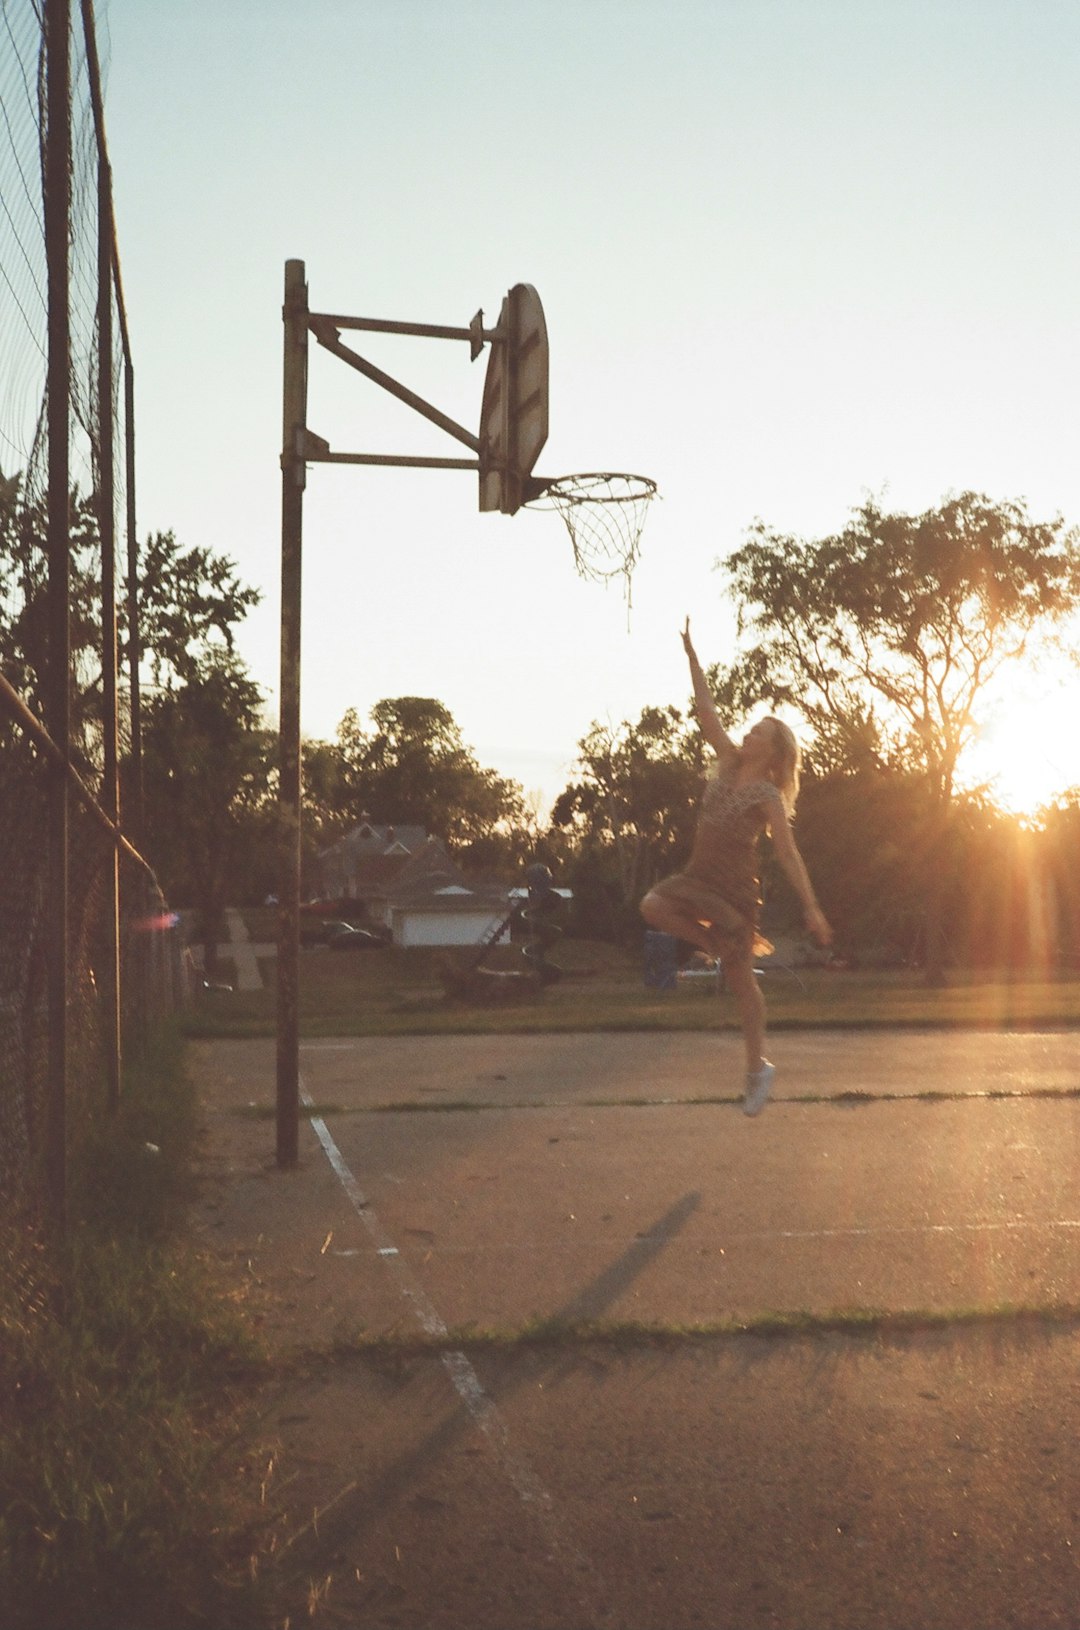 woman in white tank top and black shorts jumping on basketball hoop during sunset